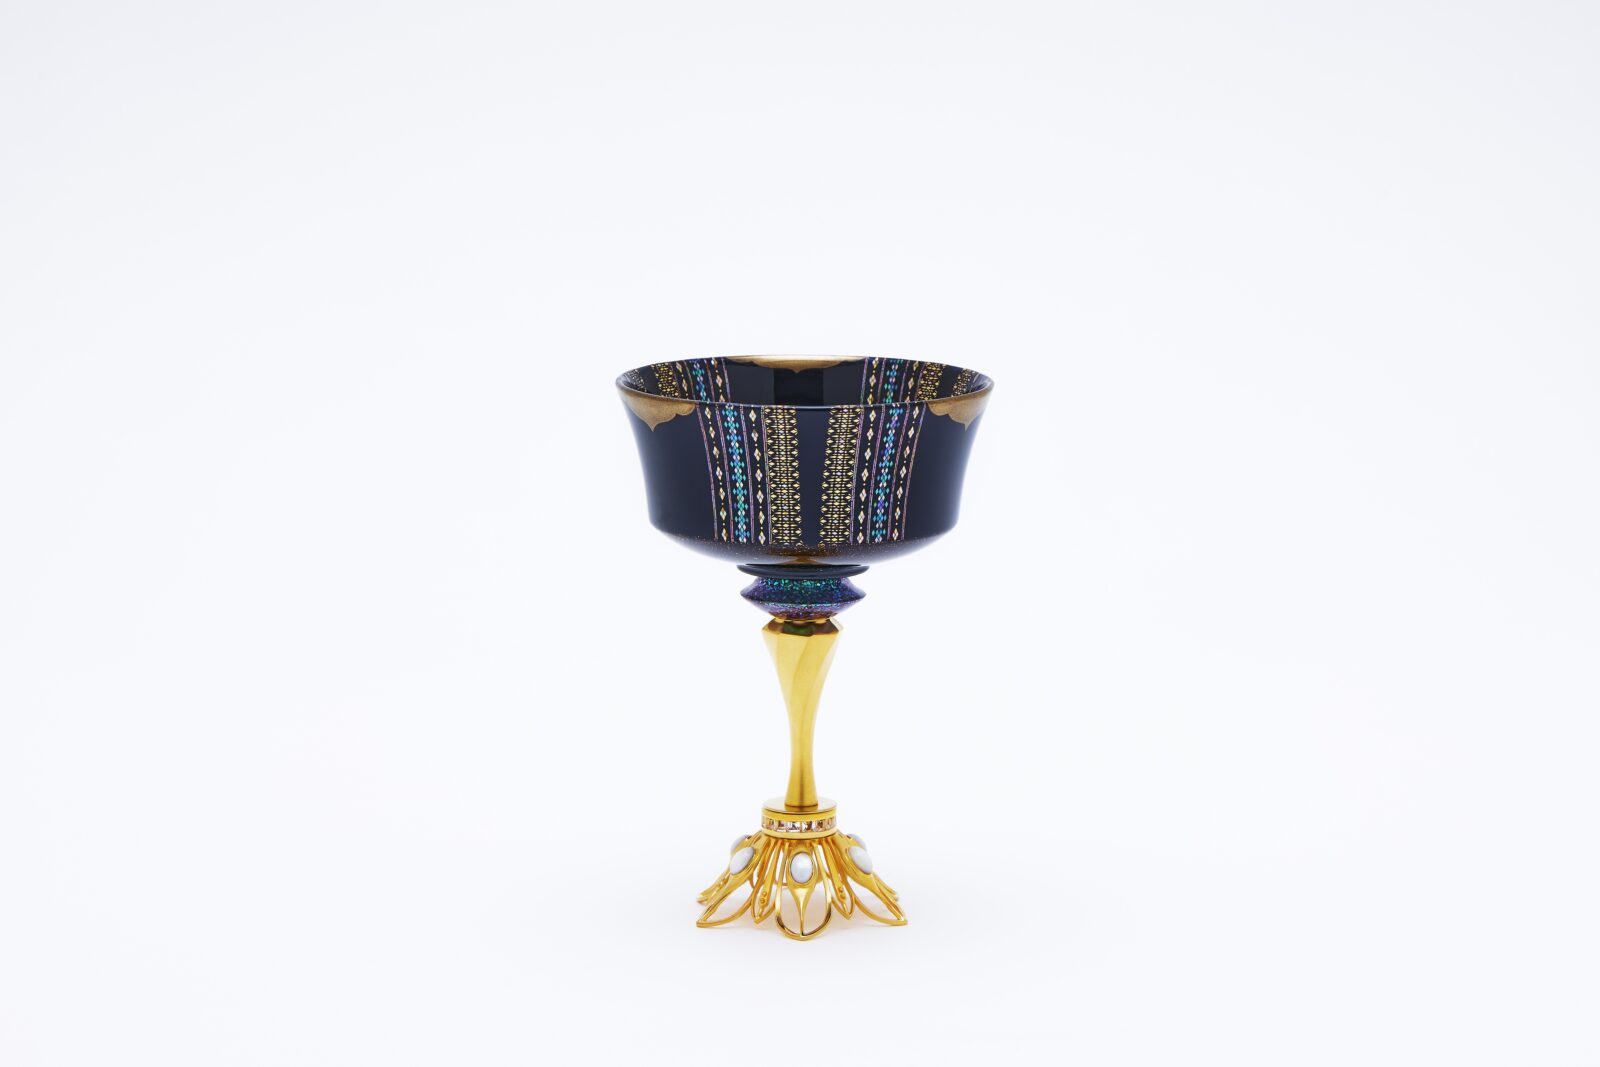 Stemmed Goblet with Maki-e and Inlaid Mother-of-pearl, “Starry Night”